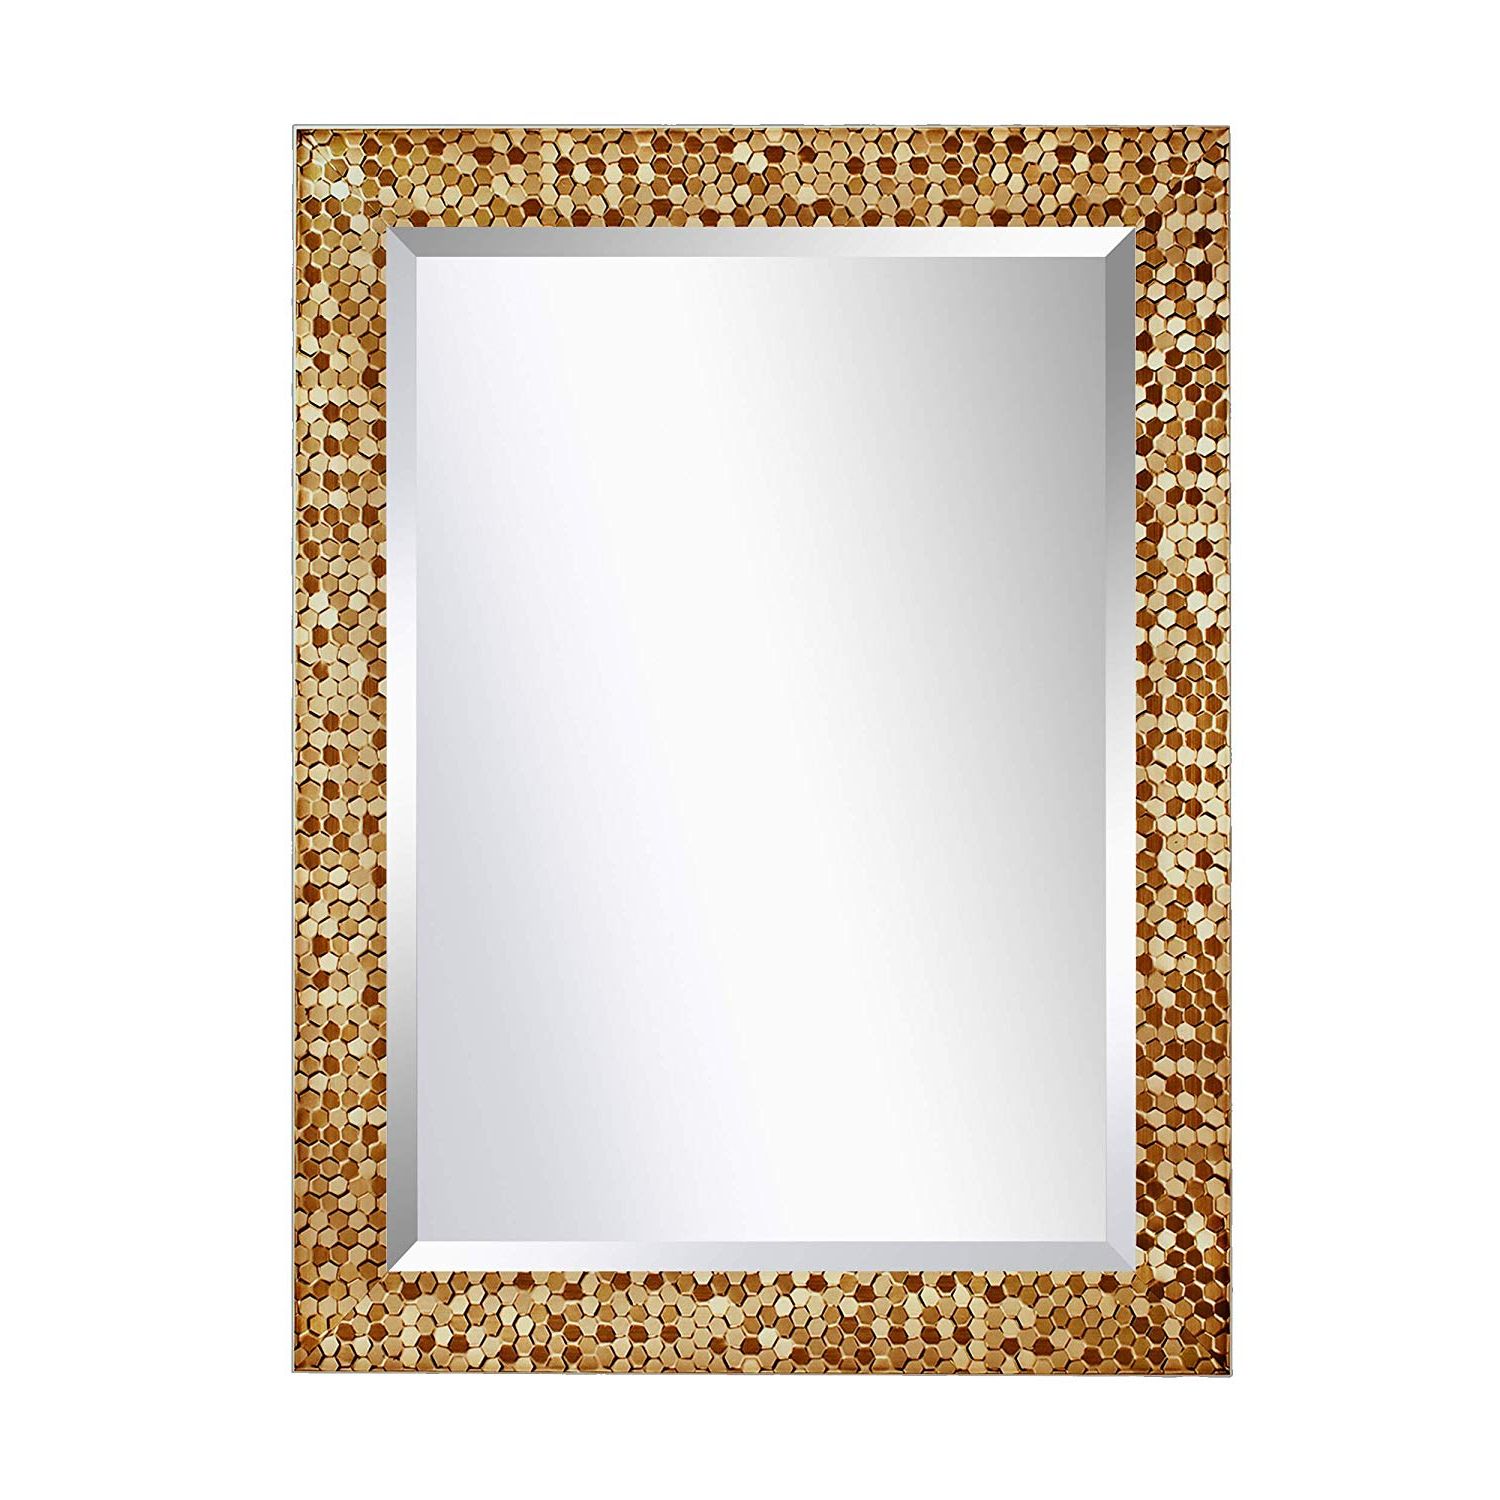 Most Recent Mirror Trend Gold Mosaic Design Framed Decorative Wall Mirror Large  Rectangle Mirror For Living Room, Bedroom, Vanity, Dining Room, Bathroom  Hangs With Regard To Long Wall Mirrors For Bedroom (View 11 of 20)